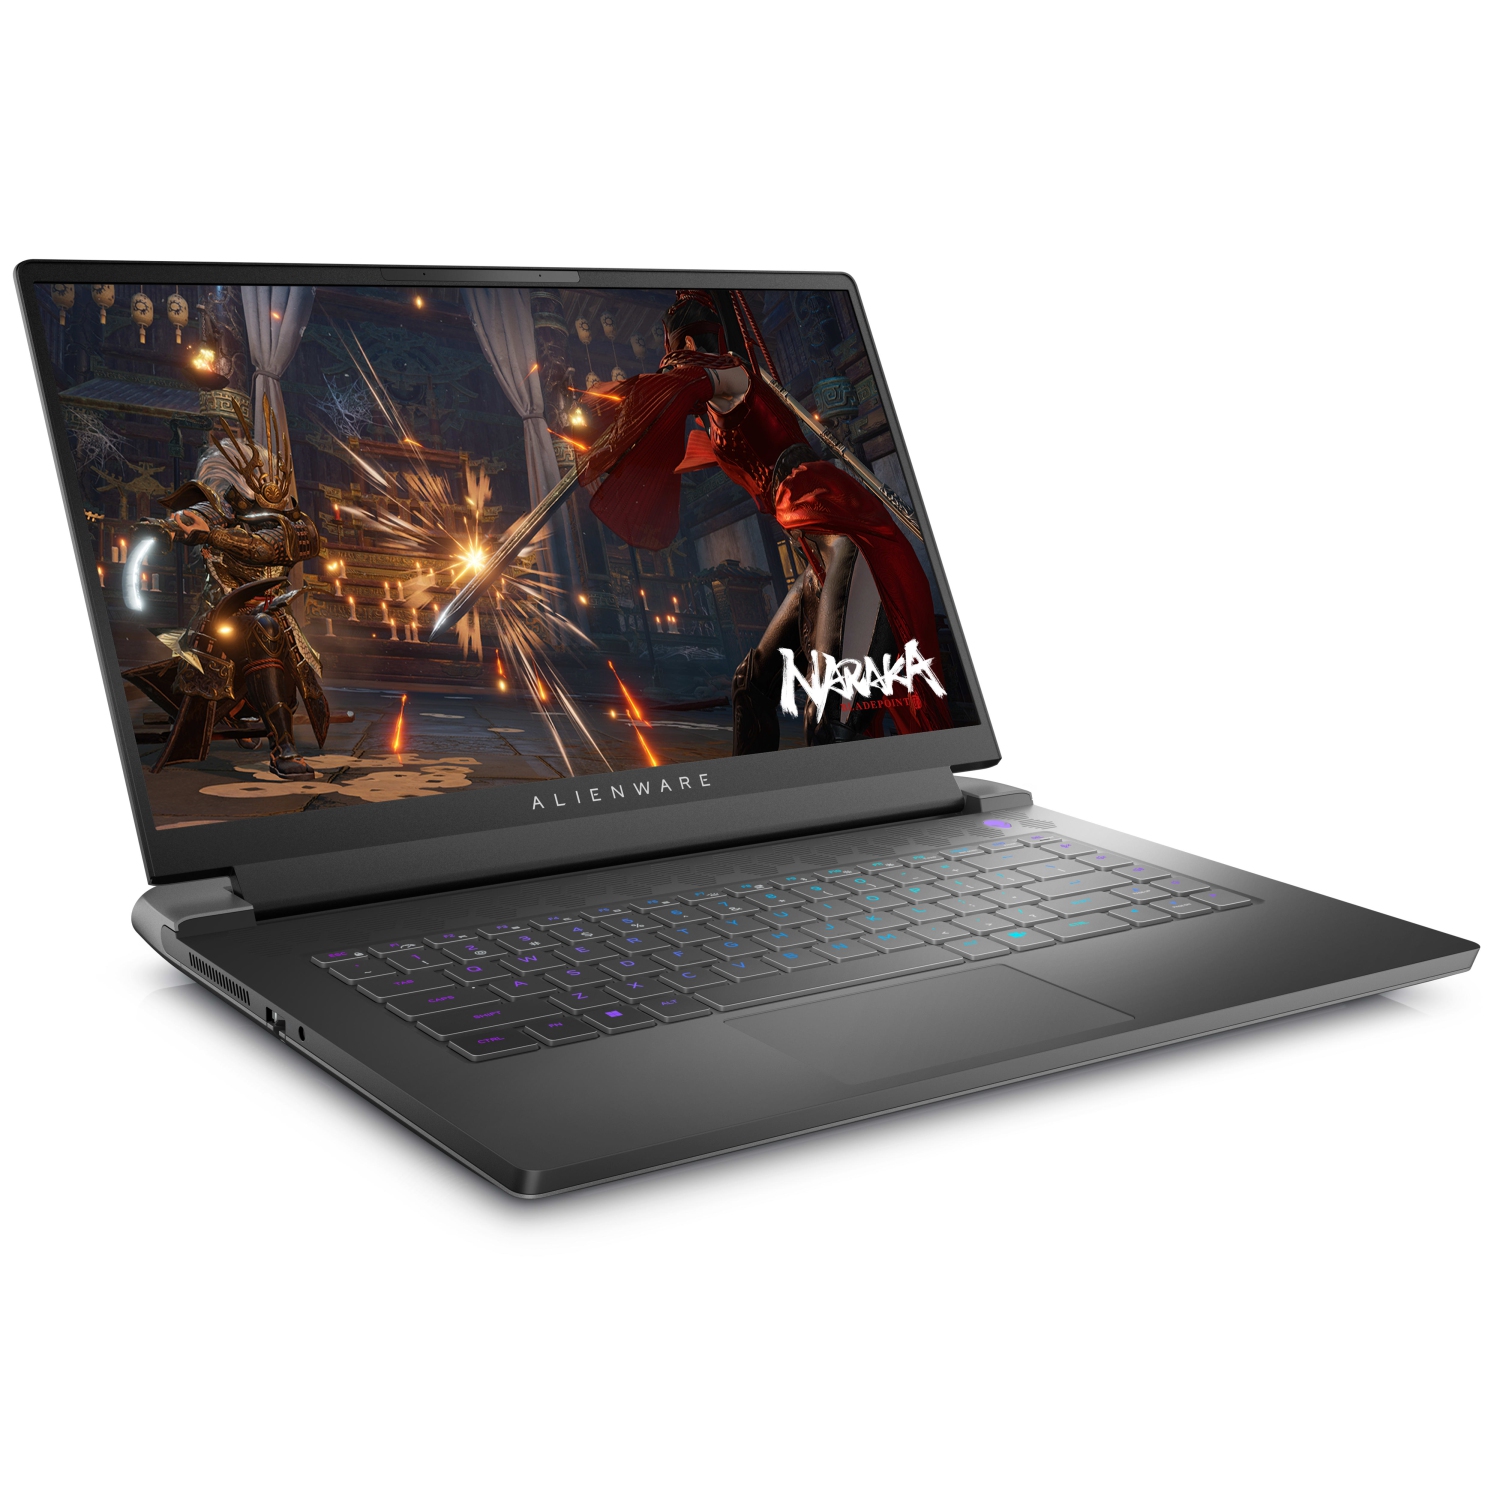 Refurbished (Excellent) – Dell Alienware m15 R7 Gaming Laptop (2022) | 15.6" FHD | Core i9 - 512GB SSD - 32GB RAM - RTX 3080 | 14 Cores @ 5 GHz - 12th Gen CPU - 8GB GDDR6X